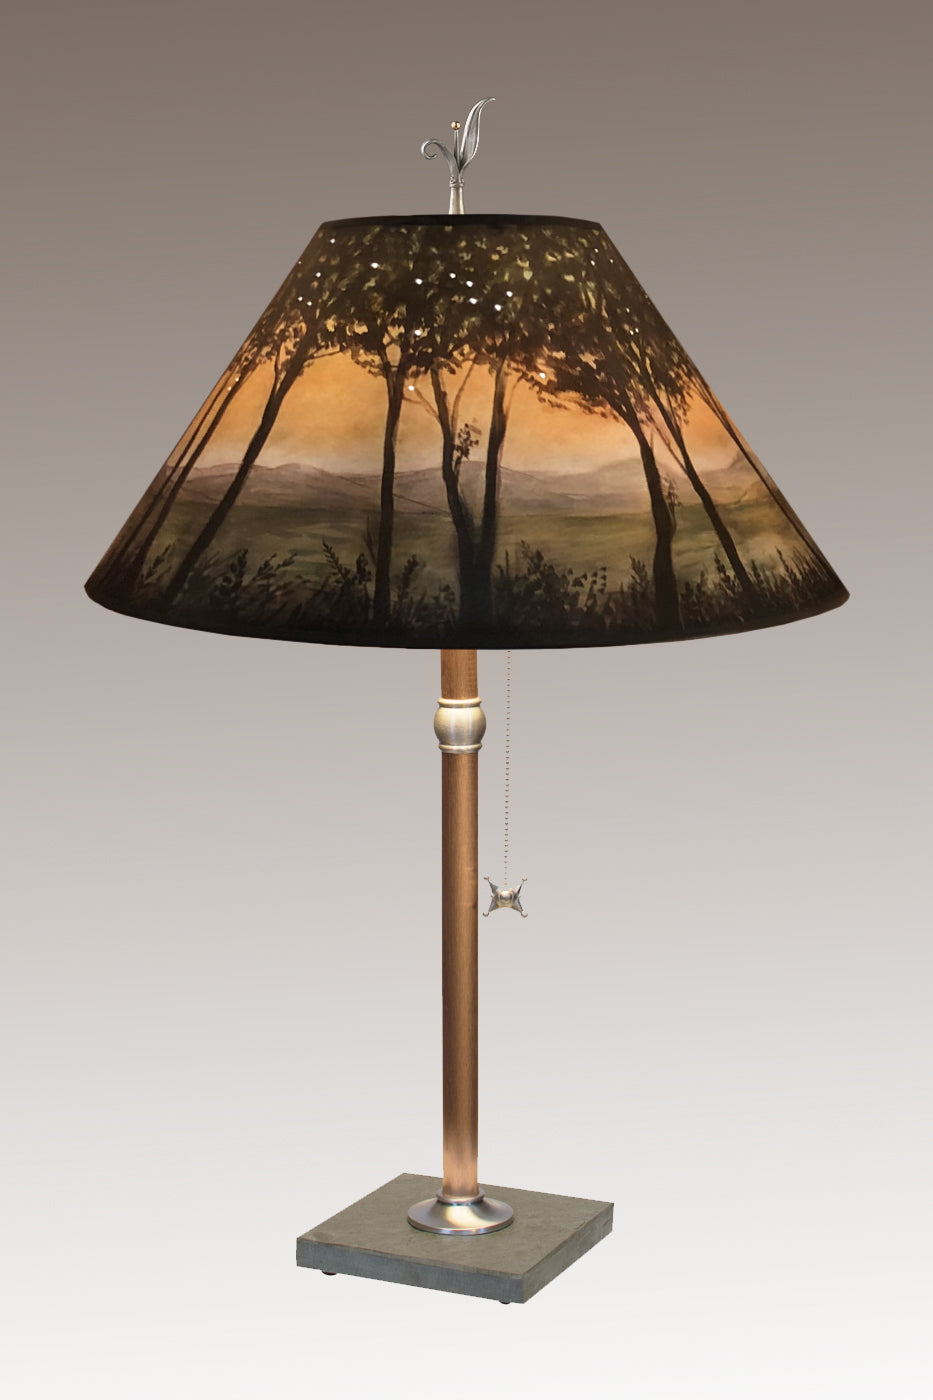 Janna Ugone & Co Table Lamps Copper Table Lamp with Large Conical Shade in Dawn